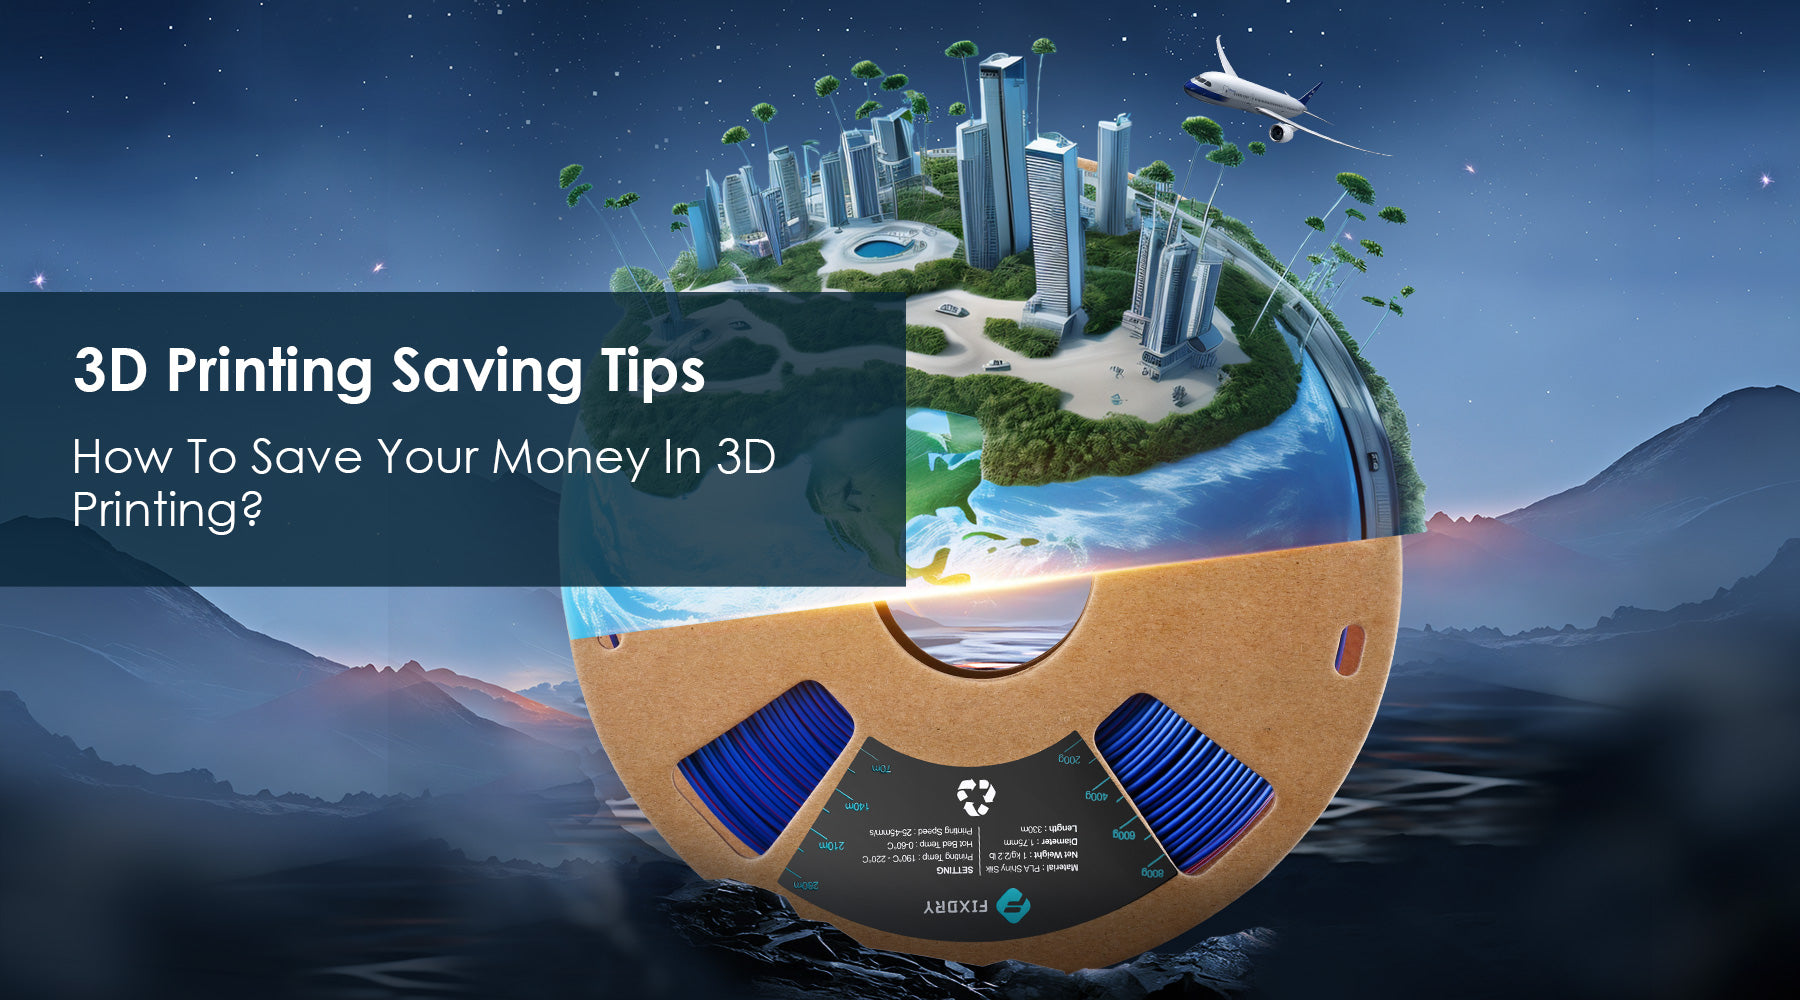 3D Printing Saving Tips: How To Save Your Money In 3D Printing?